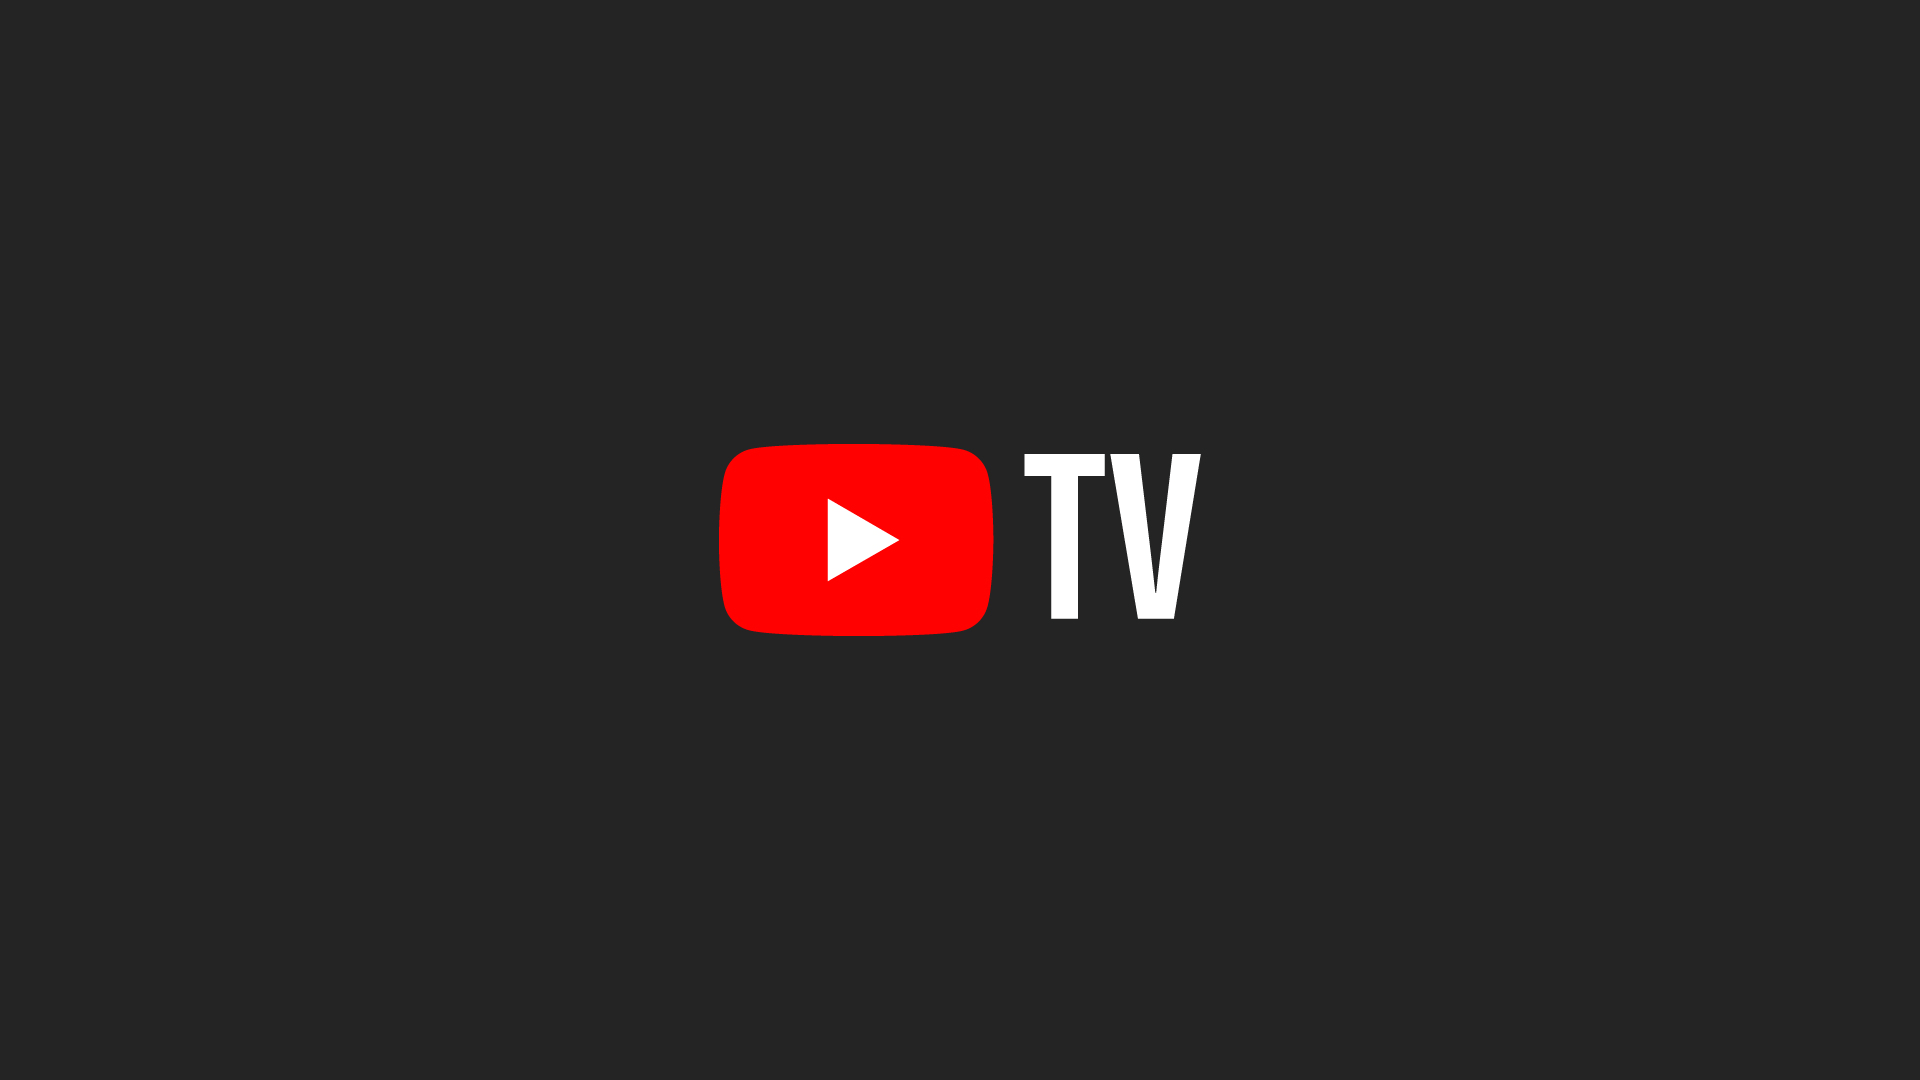 YouTube TV is Offering Members 1 Month Free of Cinemax